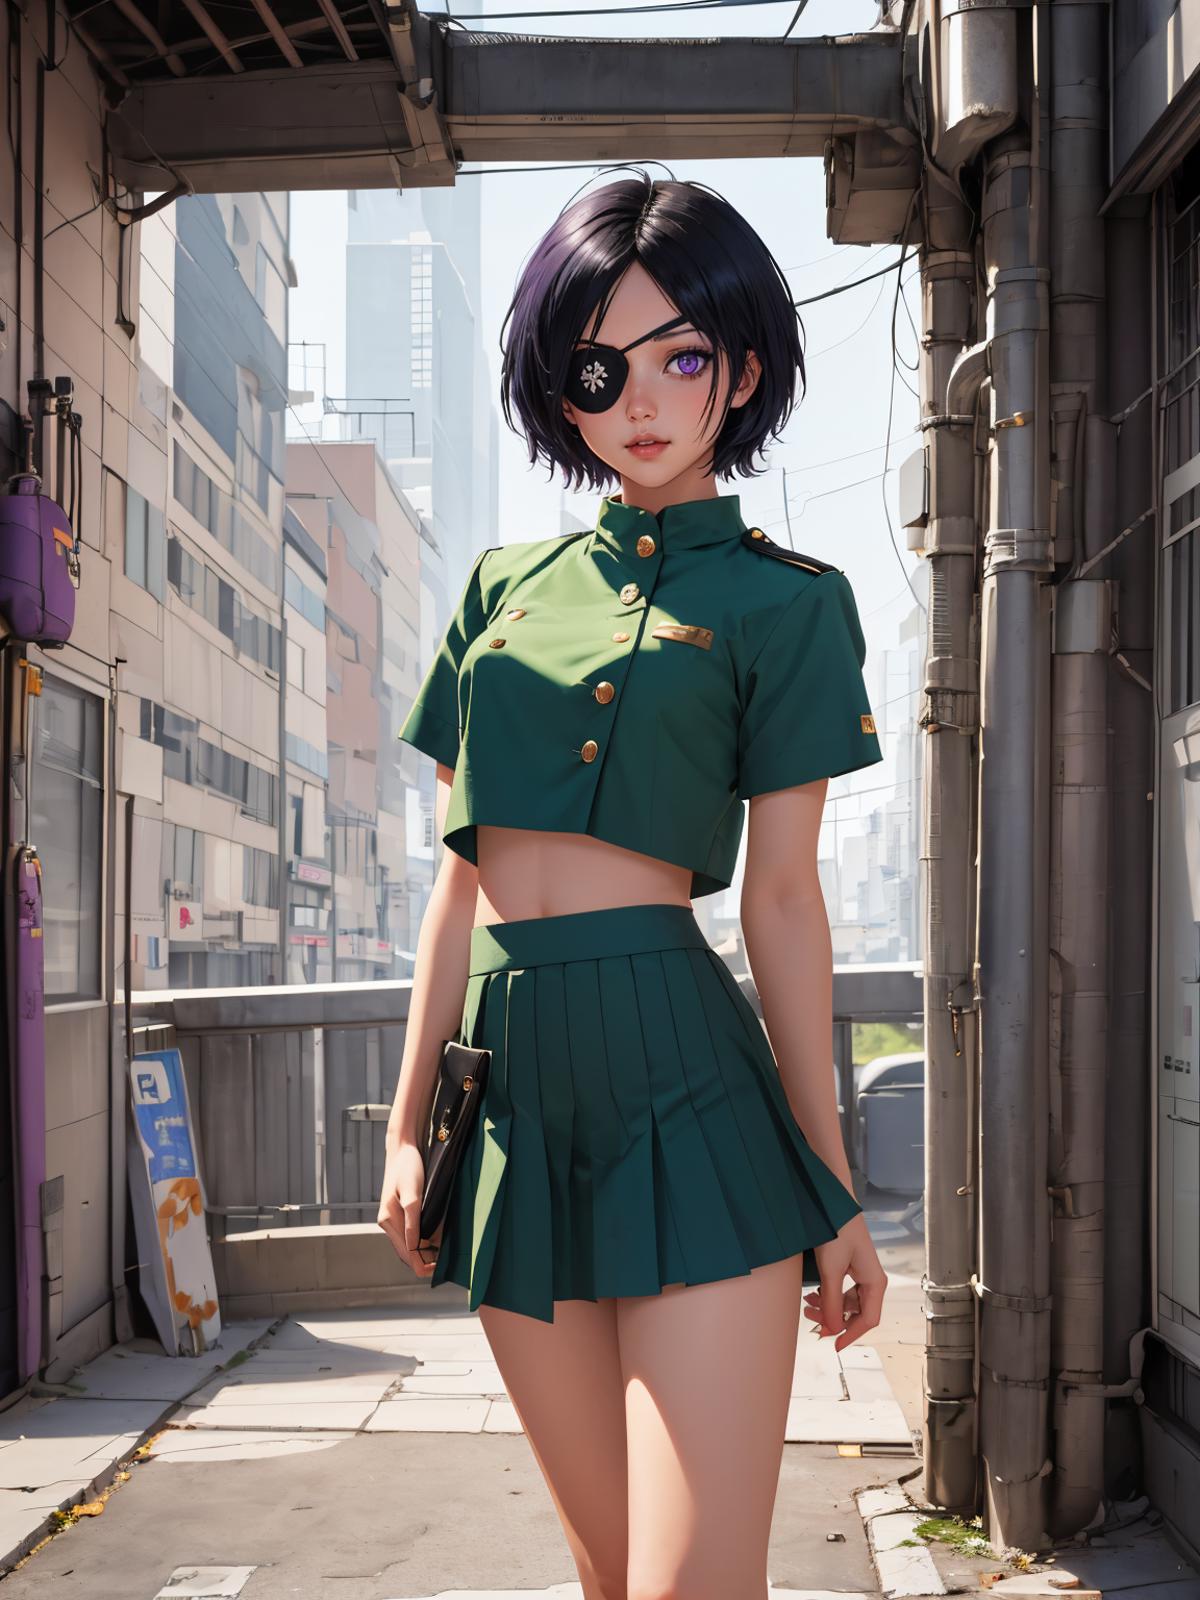 A Female Anime Character in a Green Outfit Standing on a Sidewalk.